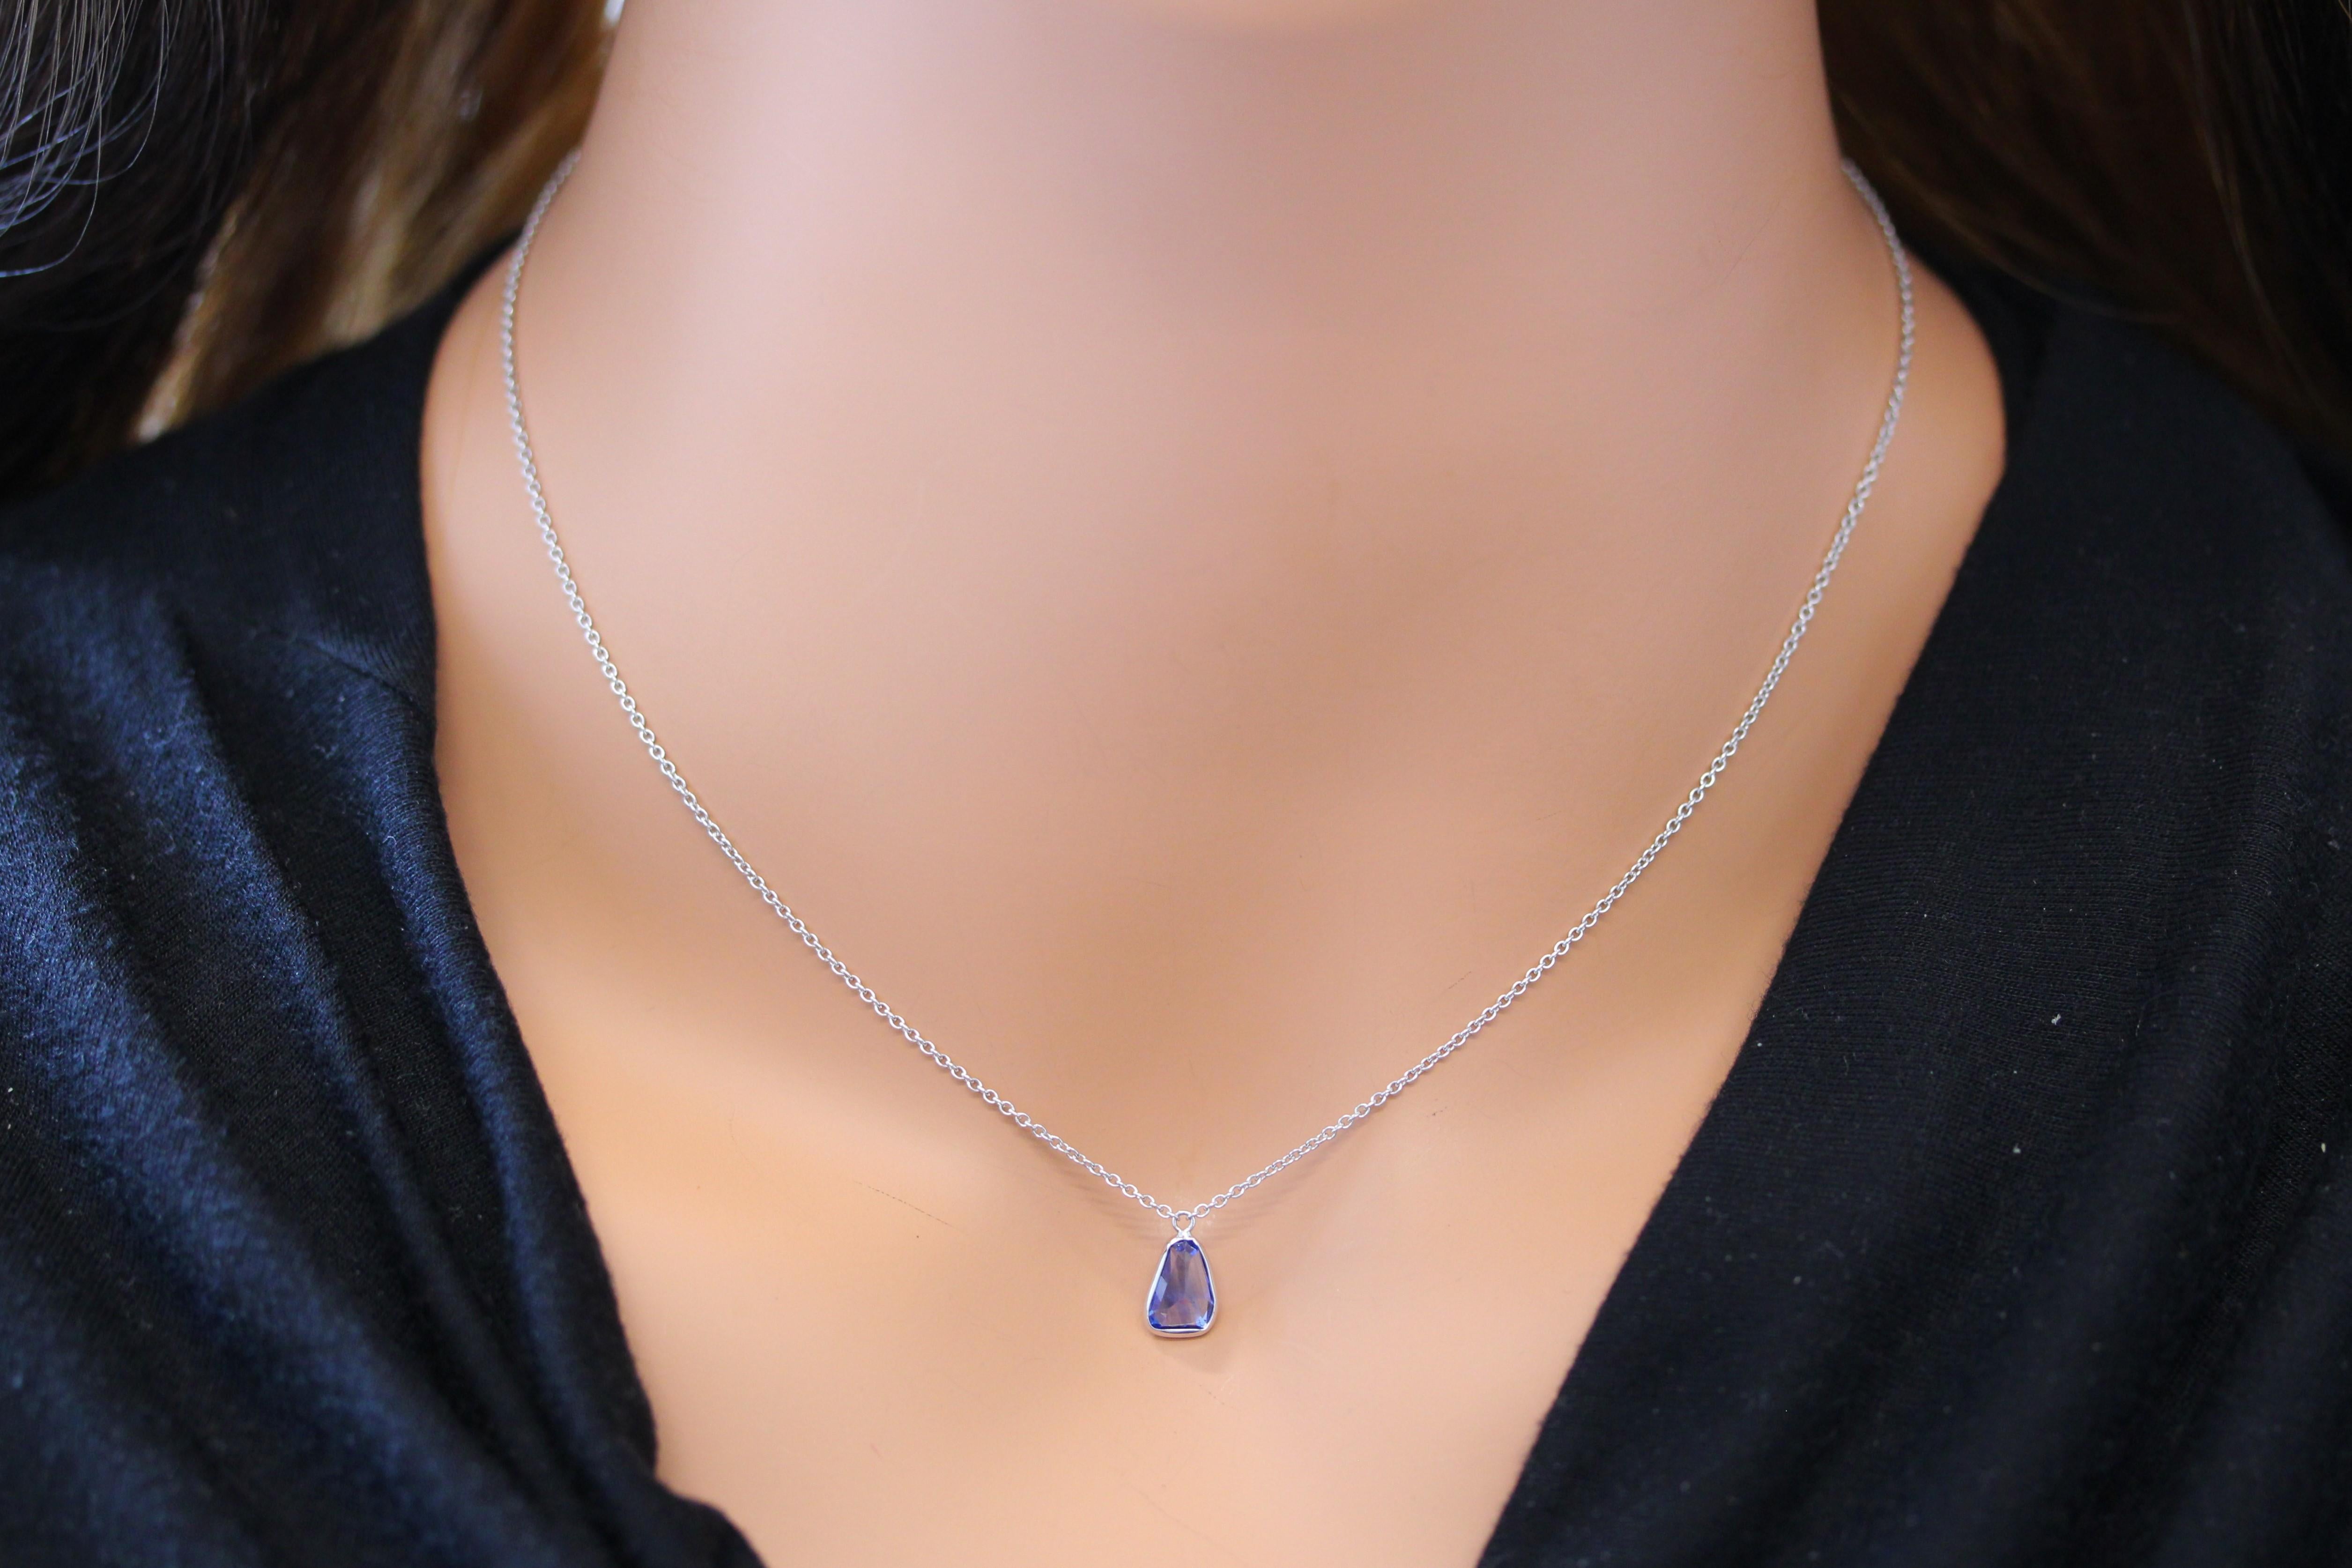 The necklace features a 1.76-carat triangle-cut blue sapphire set in a 14 karat white gold pendant or setting. The unique triangle cut and the blue sapphire's color against the white gold setting are likely to create a distinctive and stylish piece